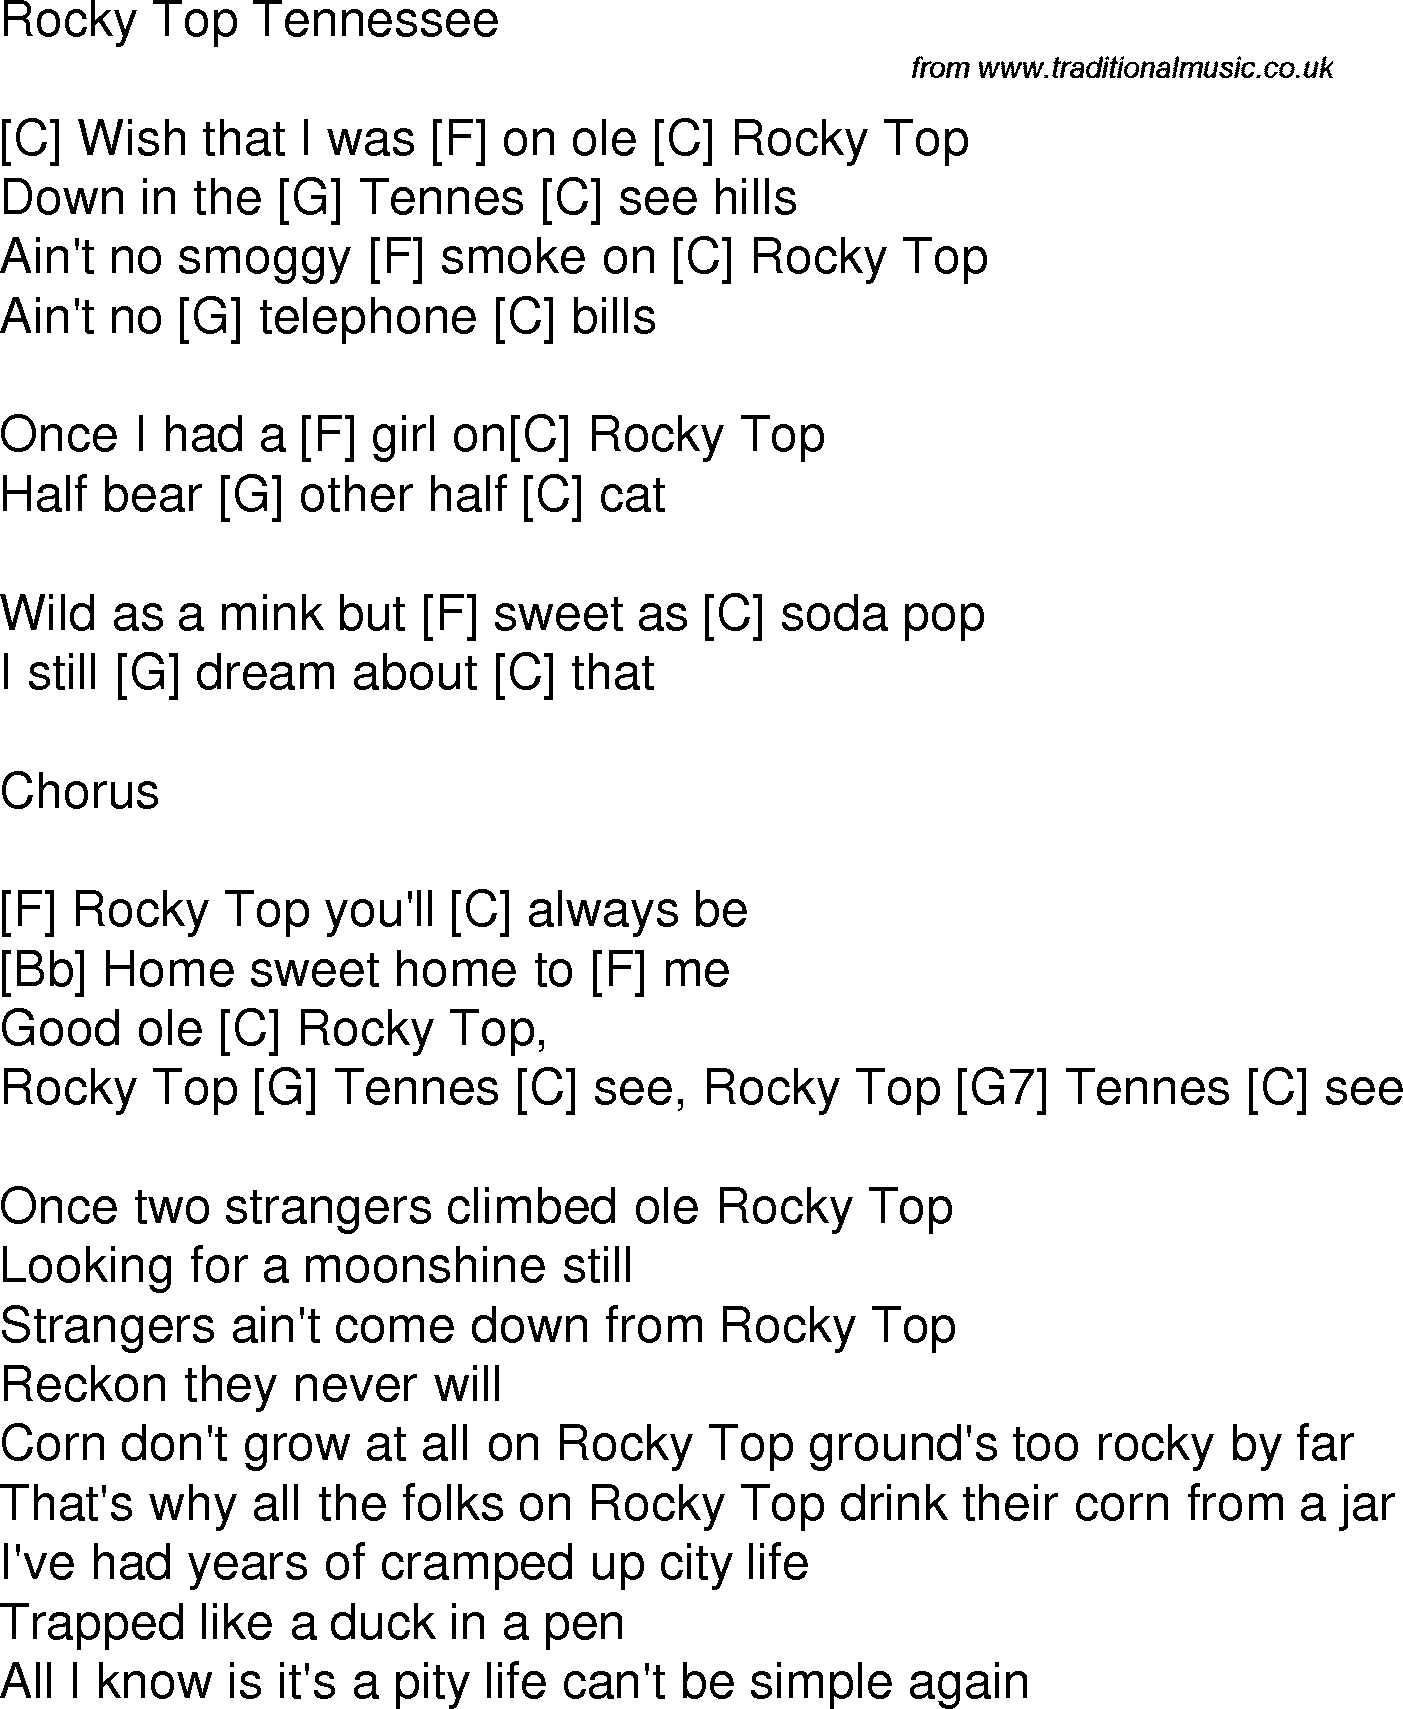 Old time song lyrics with chords for Rocky Top Tennessee C